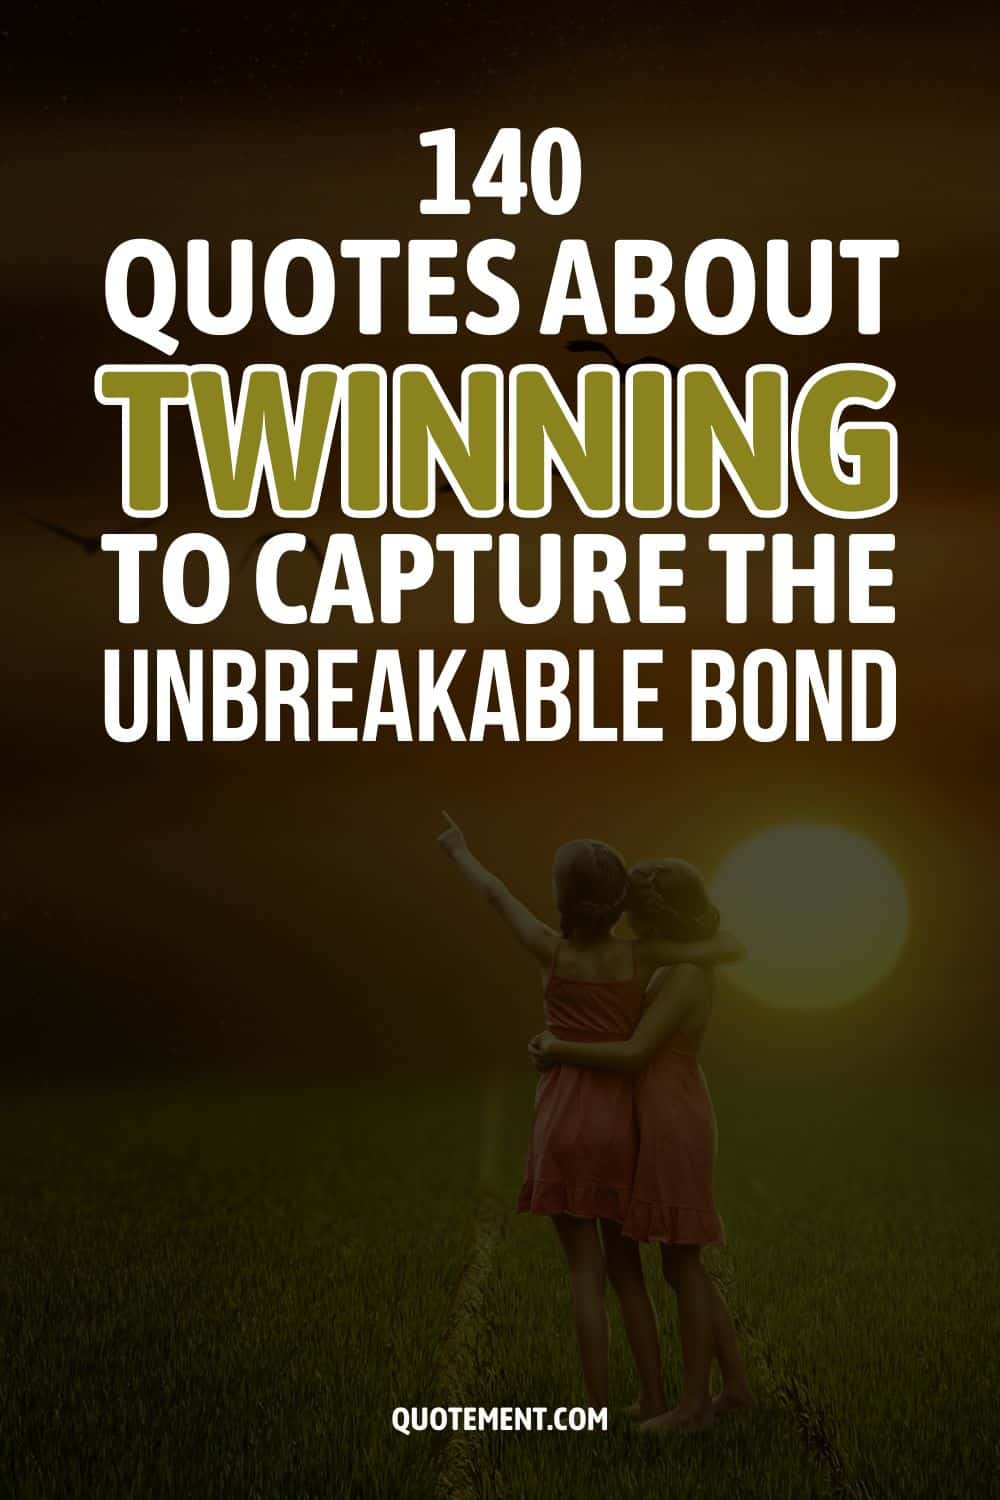 140 Quotes About Twinning To Capture The Unbreakable Bond
